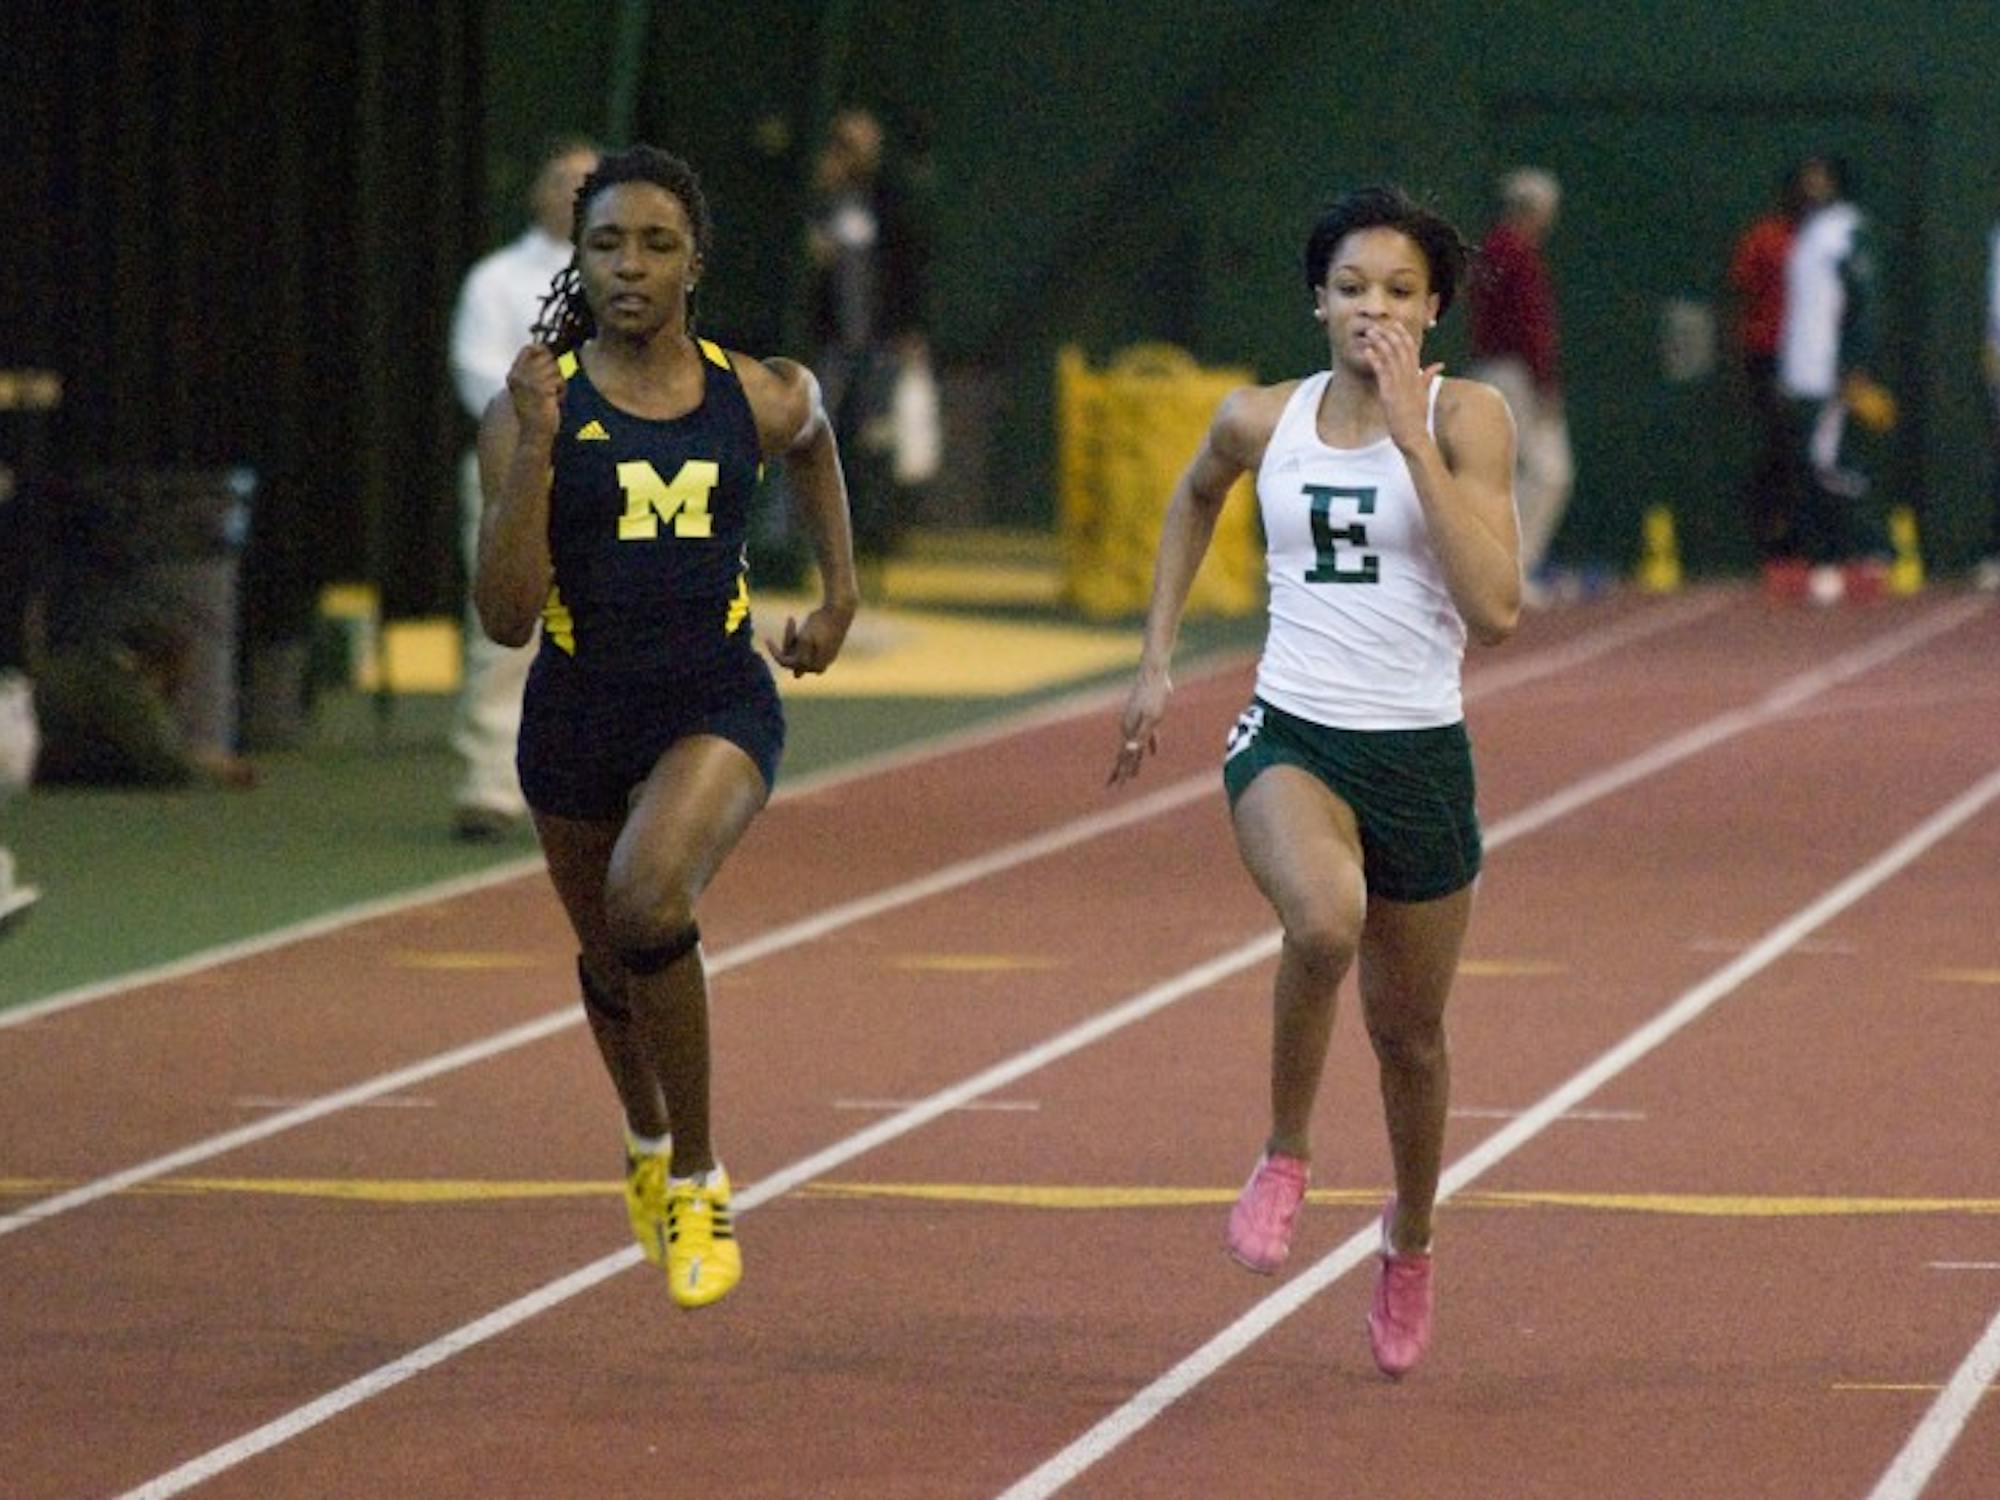 ReJeana Marigna (right) finished fourth in the 60-yard dash with a time of 7.77 seconds Saturday at the Bowen Fieldhouse.